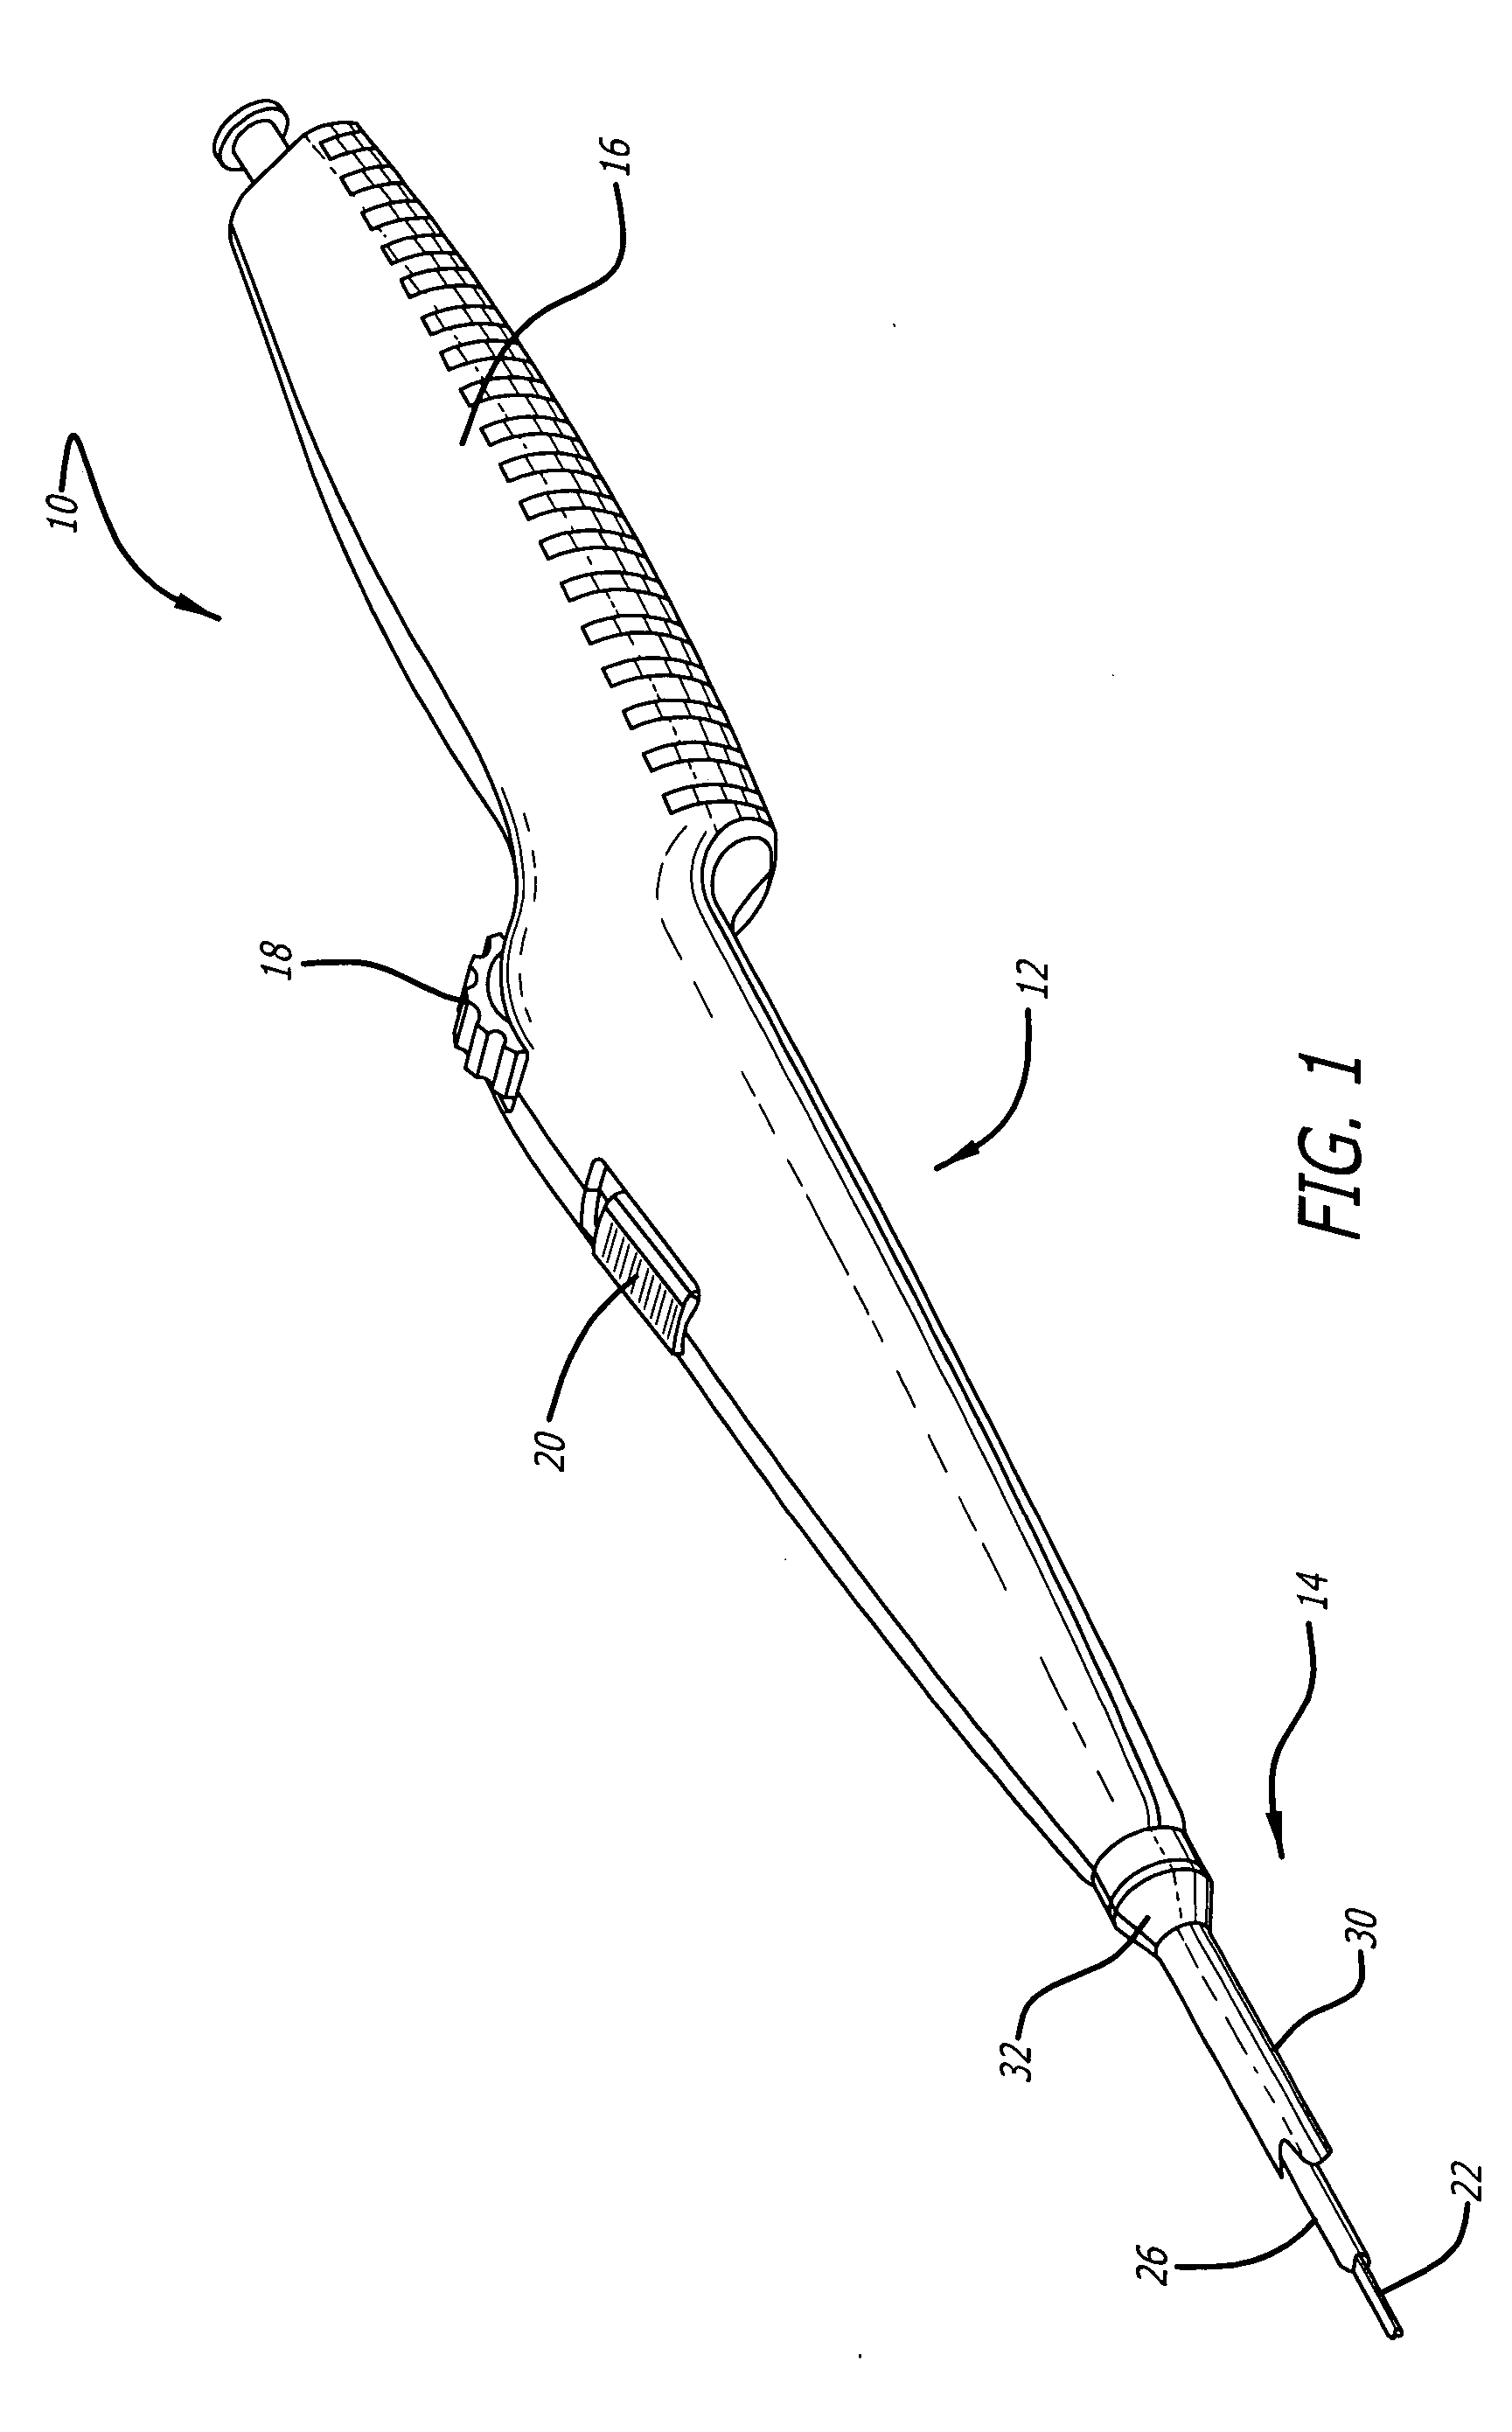 Delivery system for medical devices